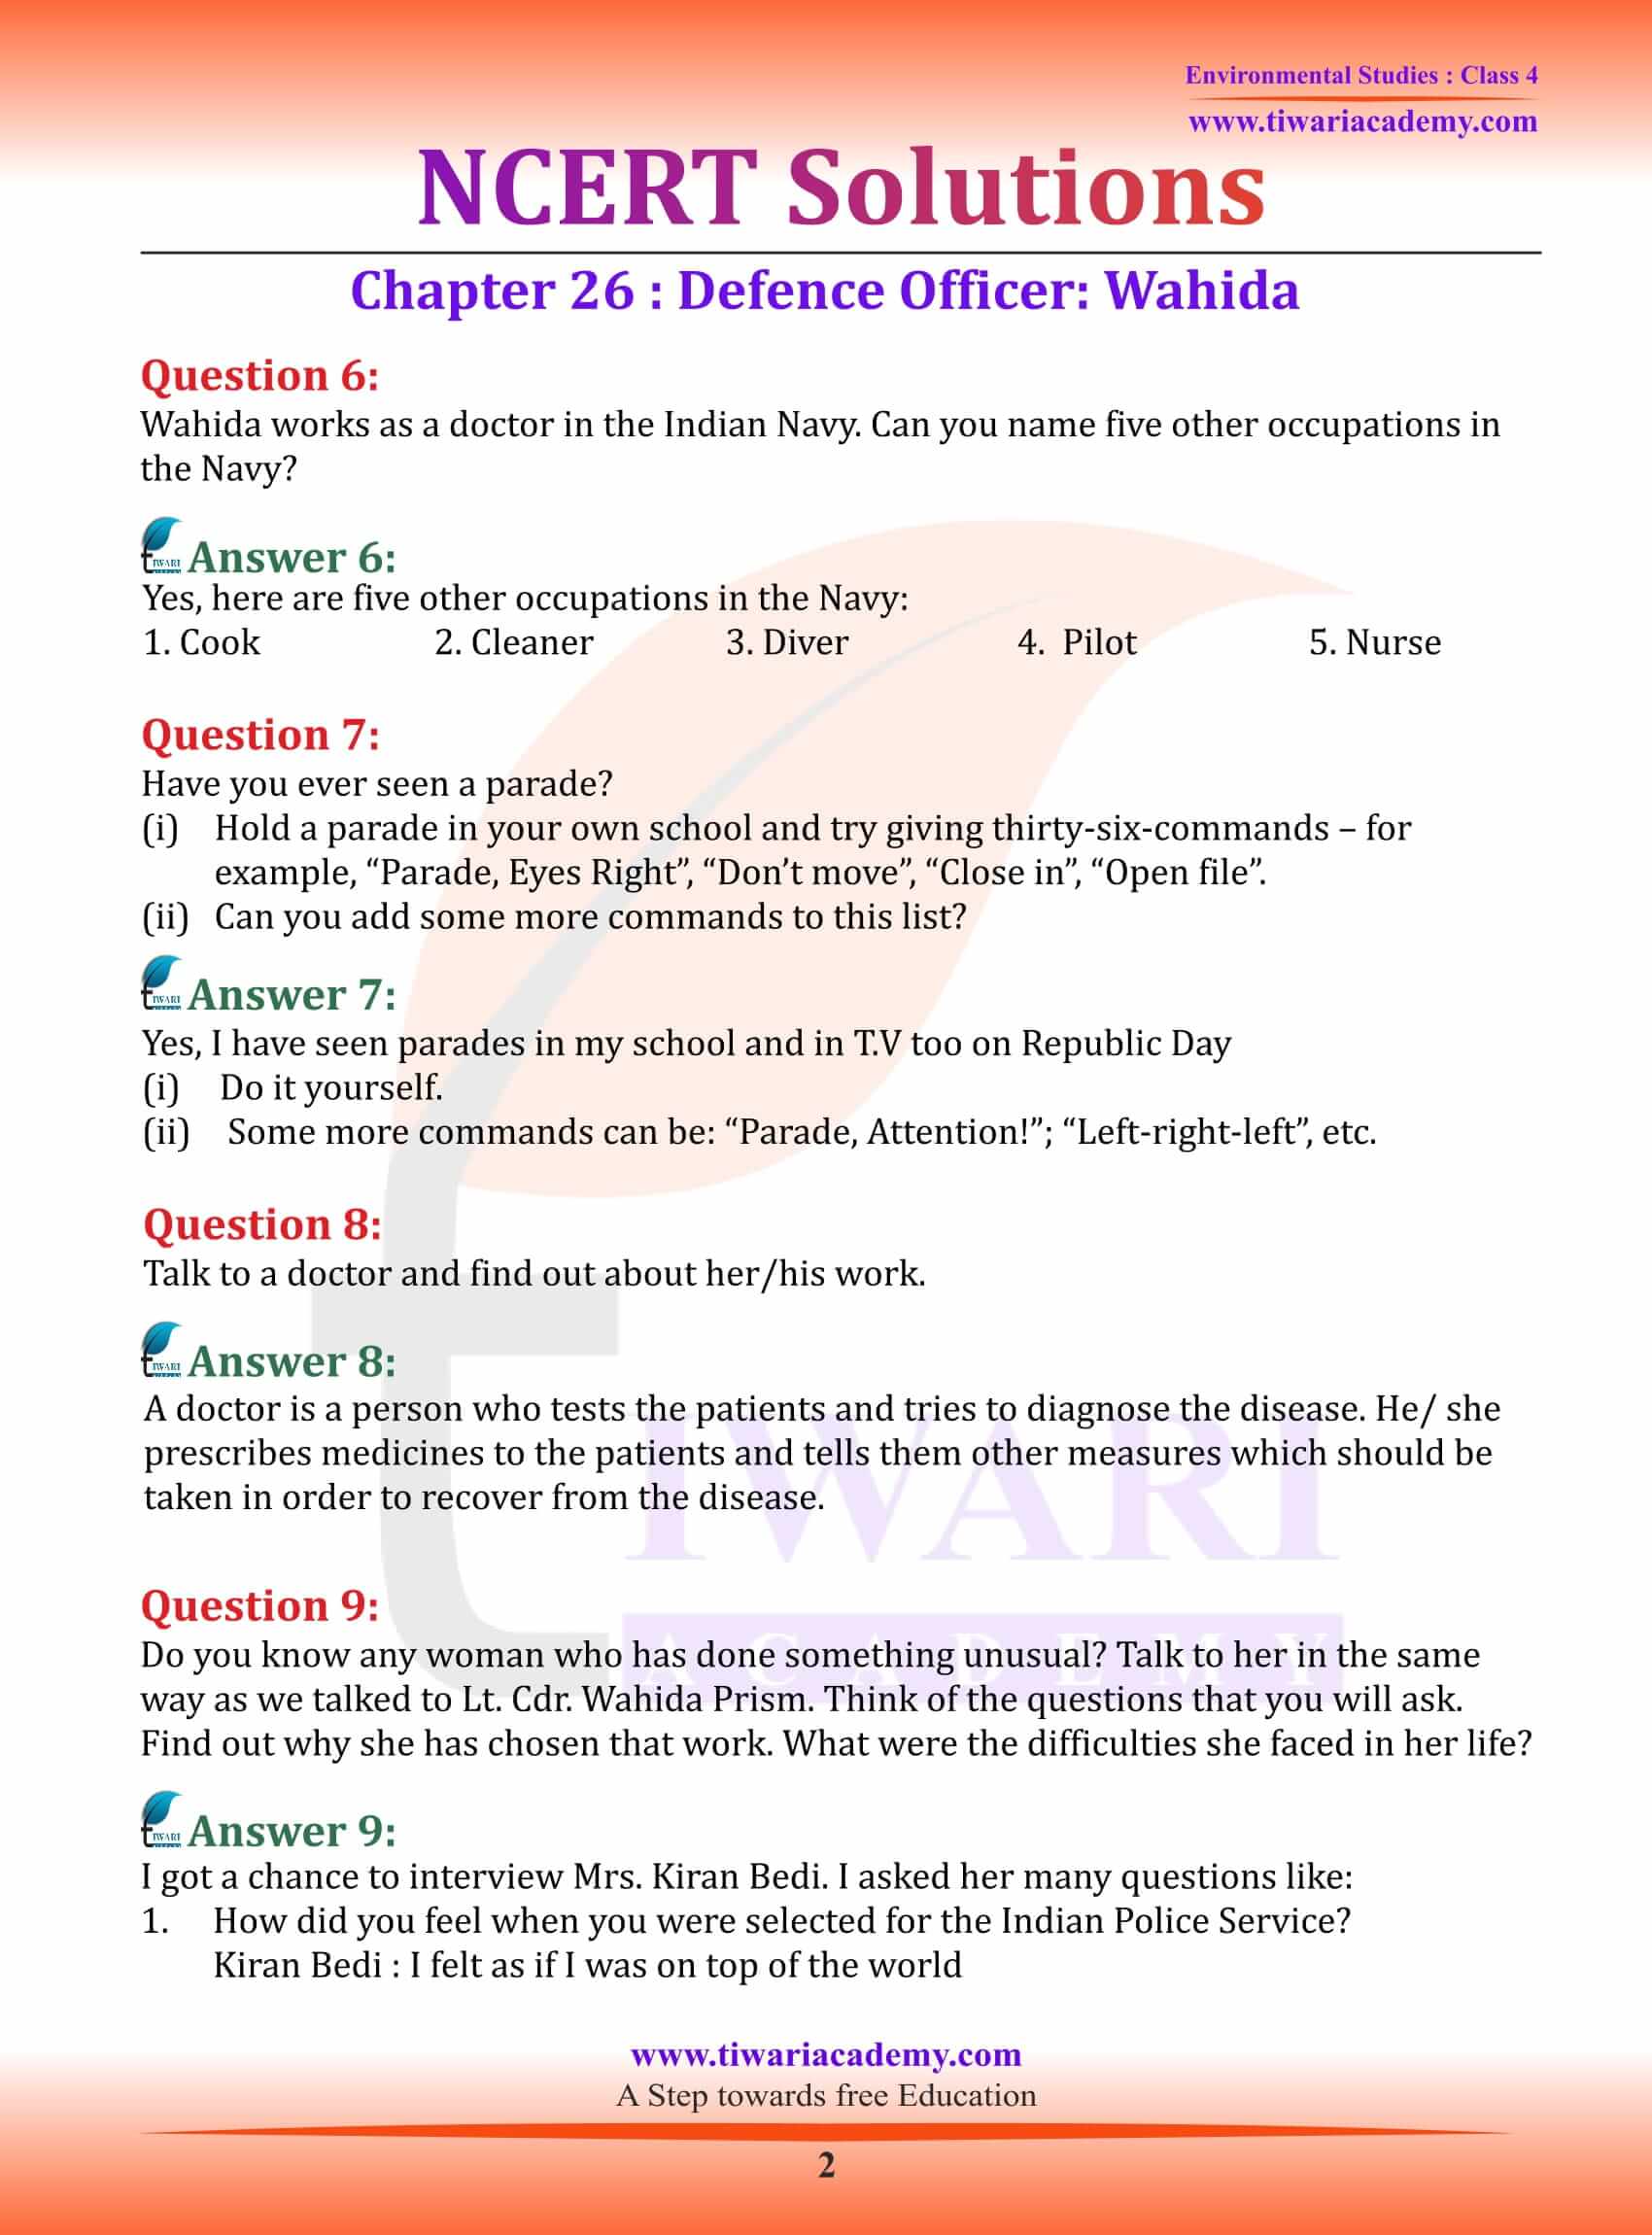 NCERT Solutions for Class 4 EVS Chapter 26